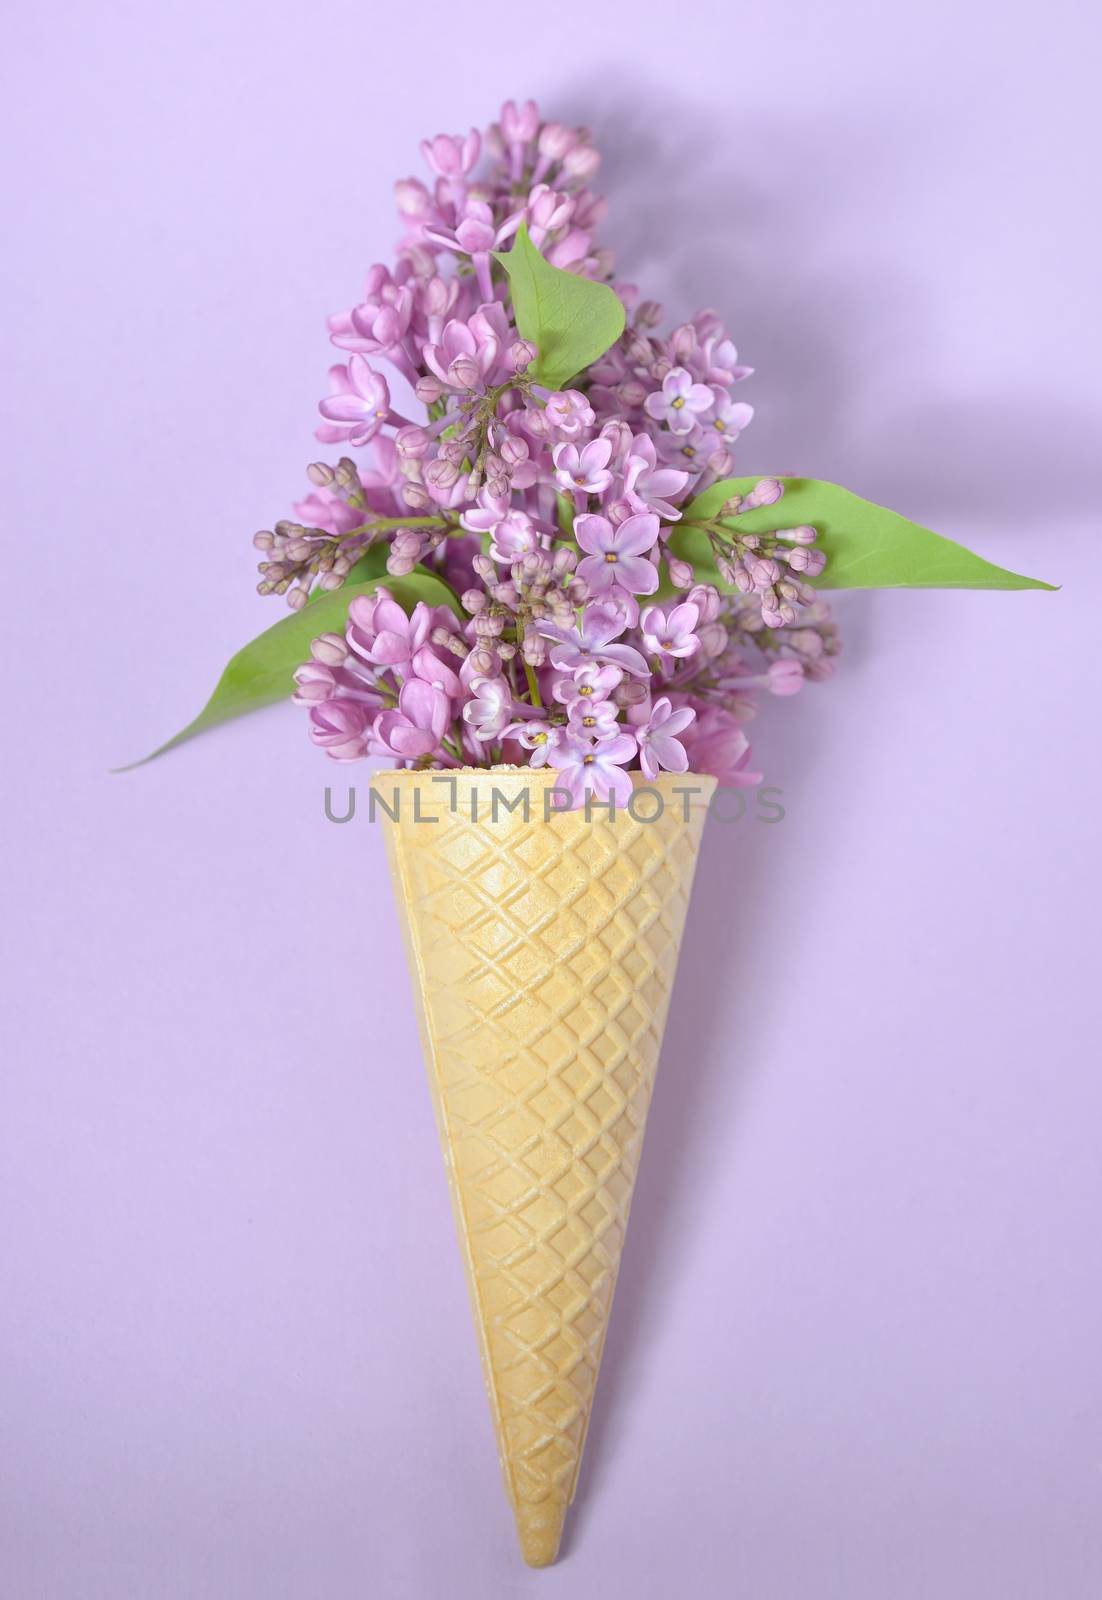 lilac in cone by mady70